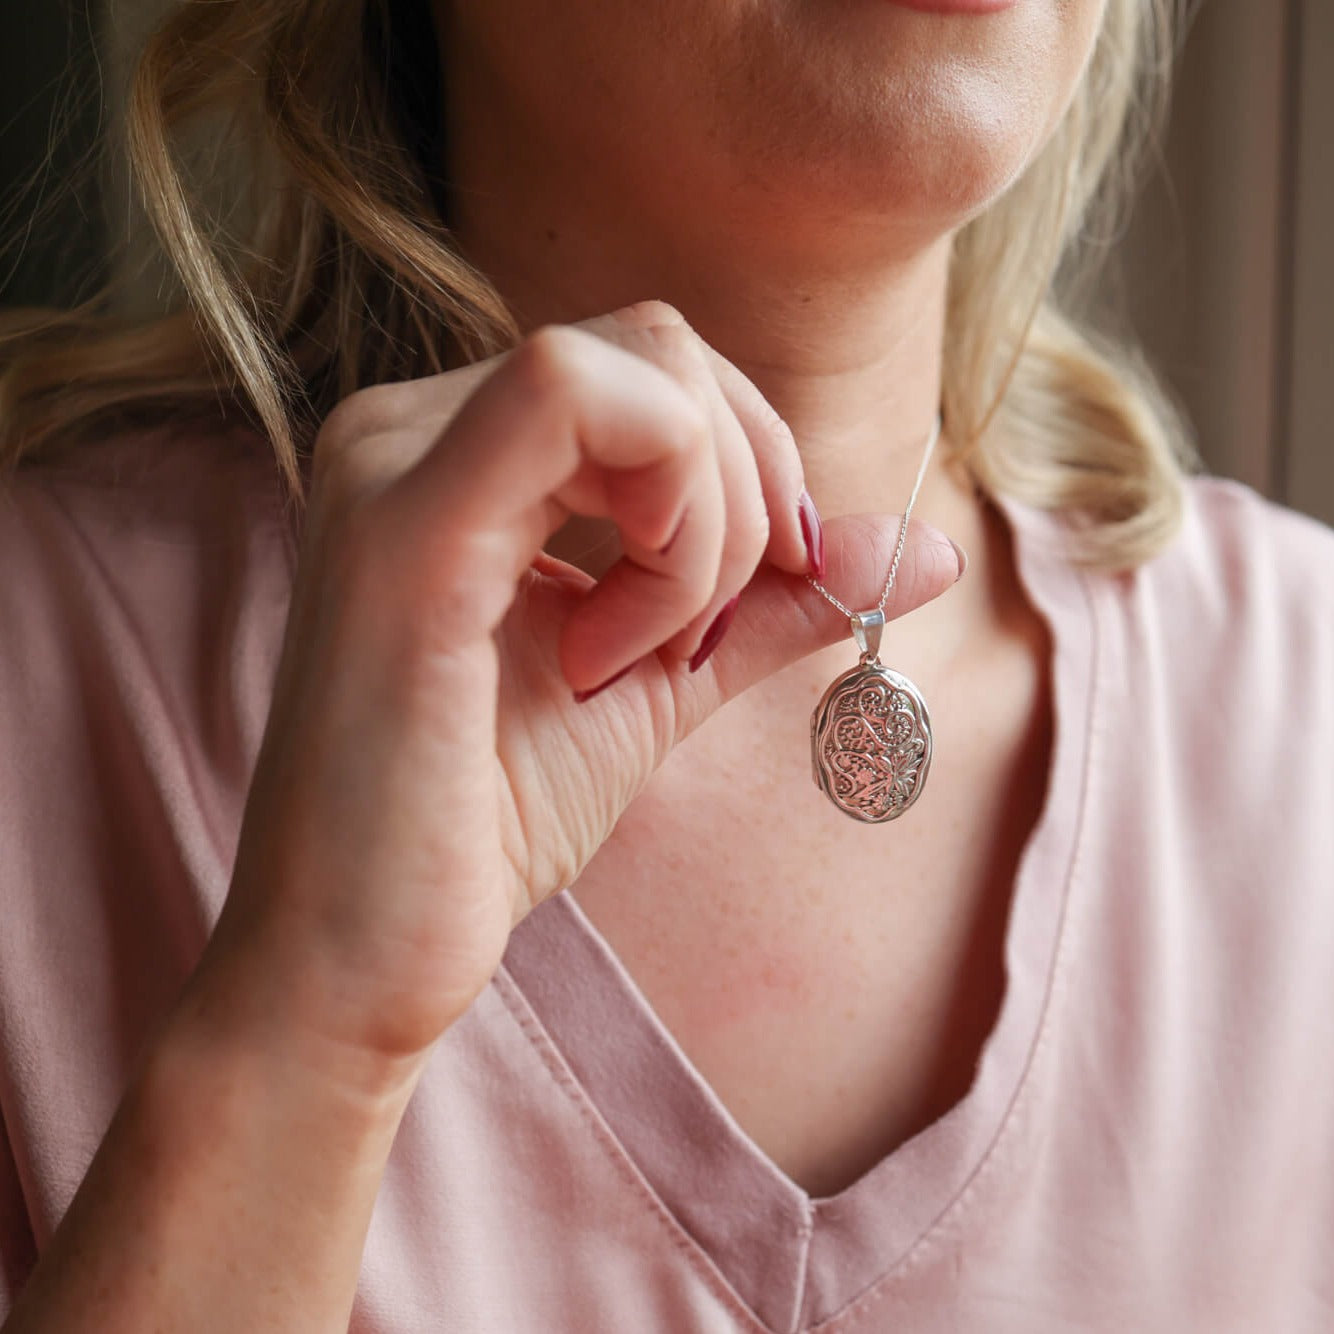 Model wearing pink top holding up oval photo locket